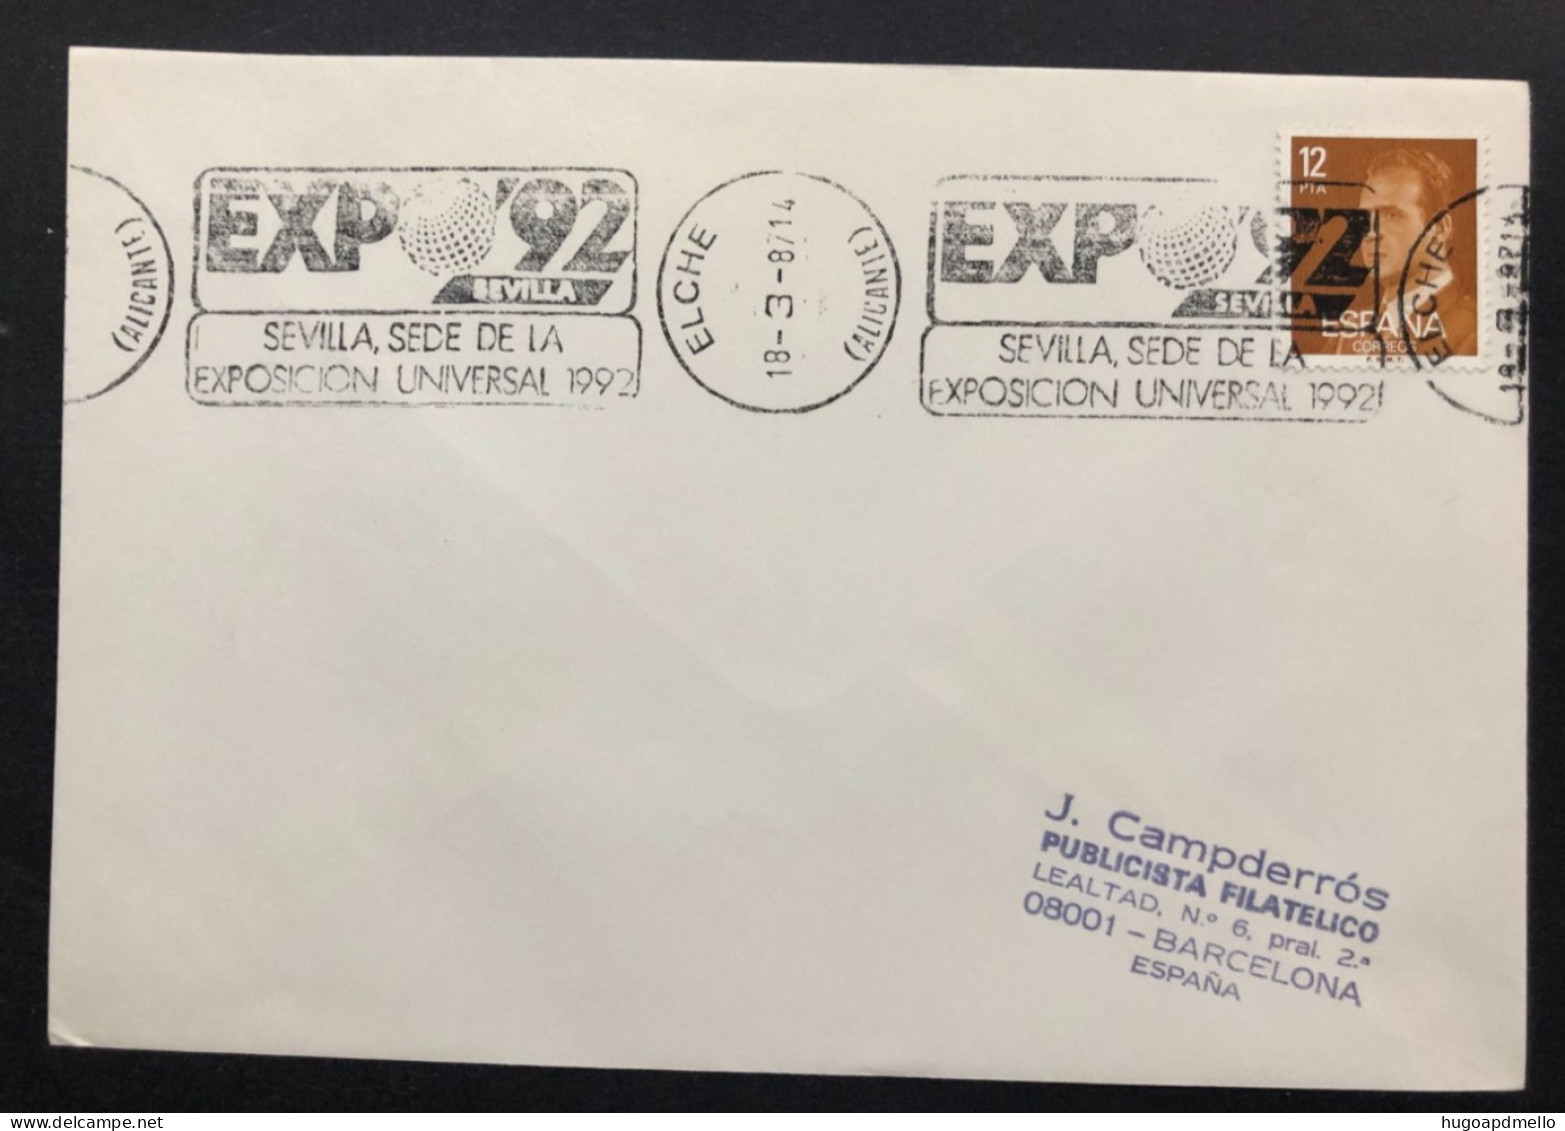 SPAIN, Cover With Special Cancellation « EXPO '92 », « ELCHE Postmark », 1987 - 1992 – Siviglia (Spagna)